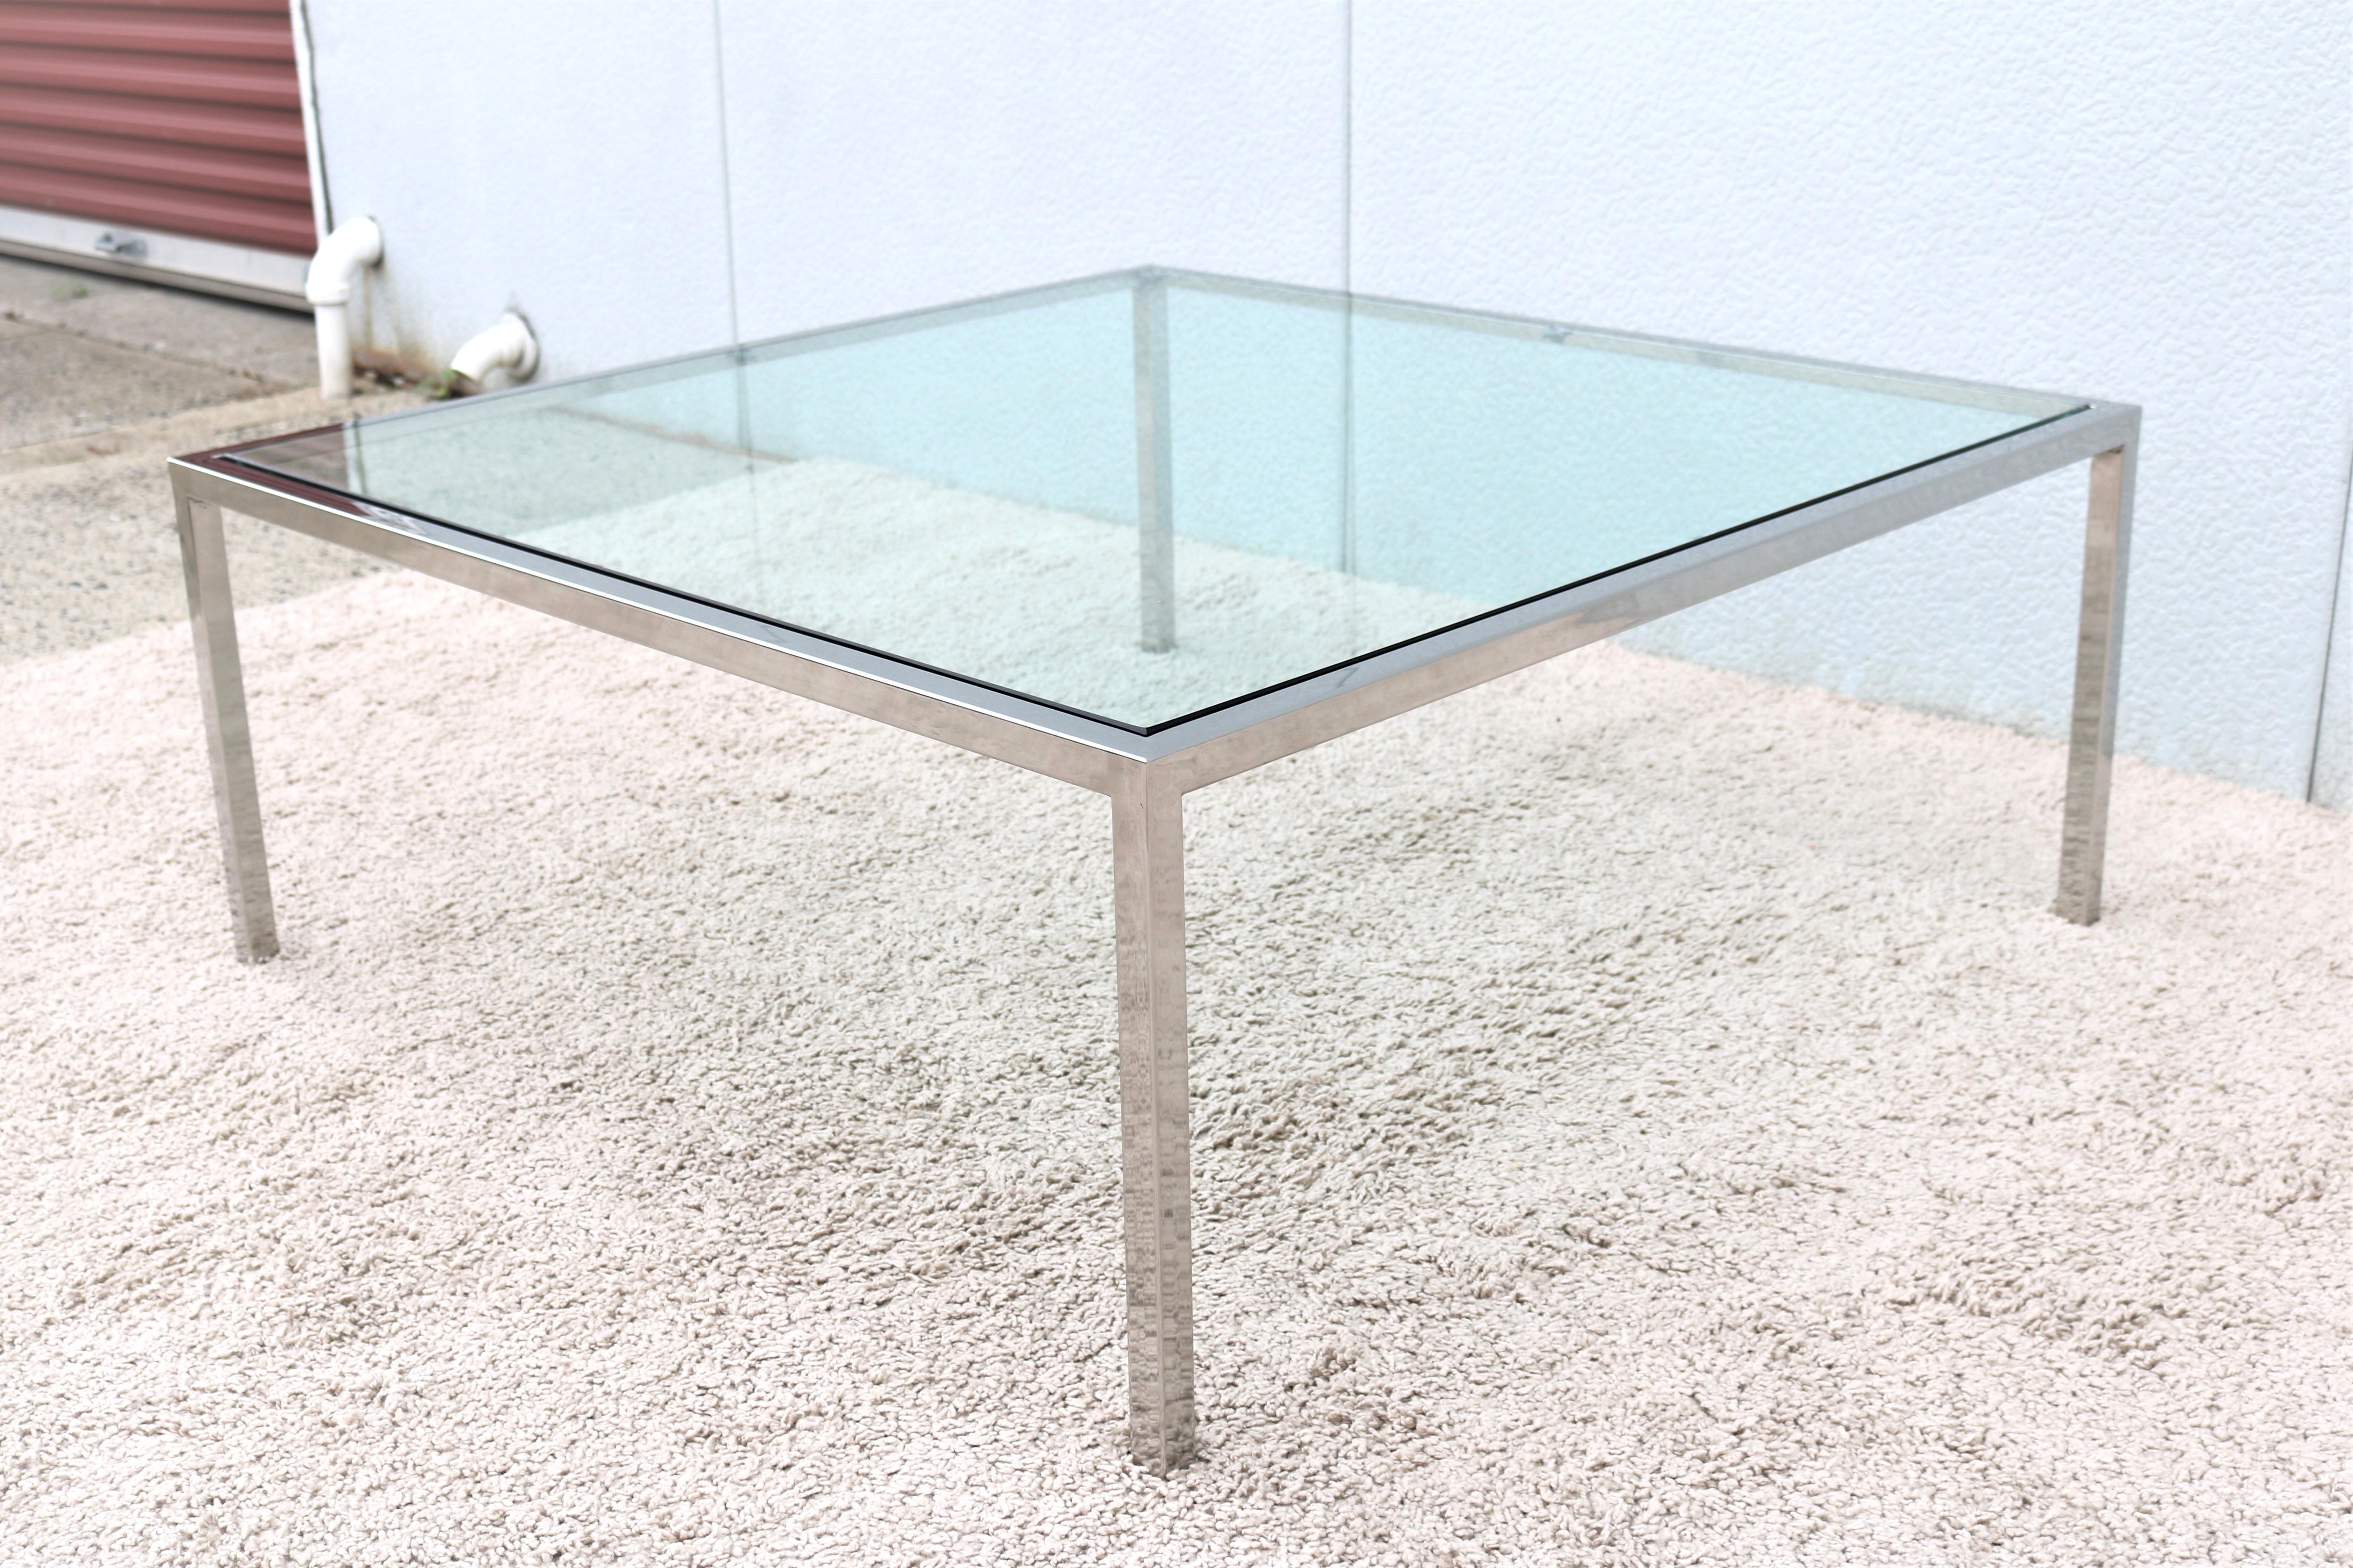 20th Century Mid-Century Modern Milo Baughman Style Glass Stainless Steel Square Coffee Table For Sale